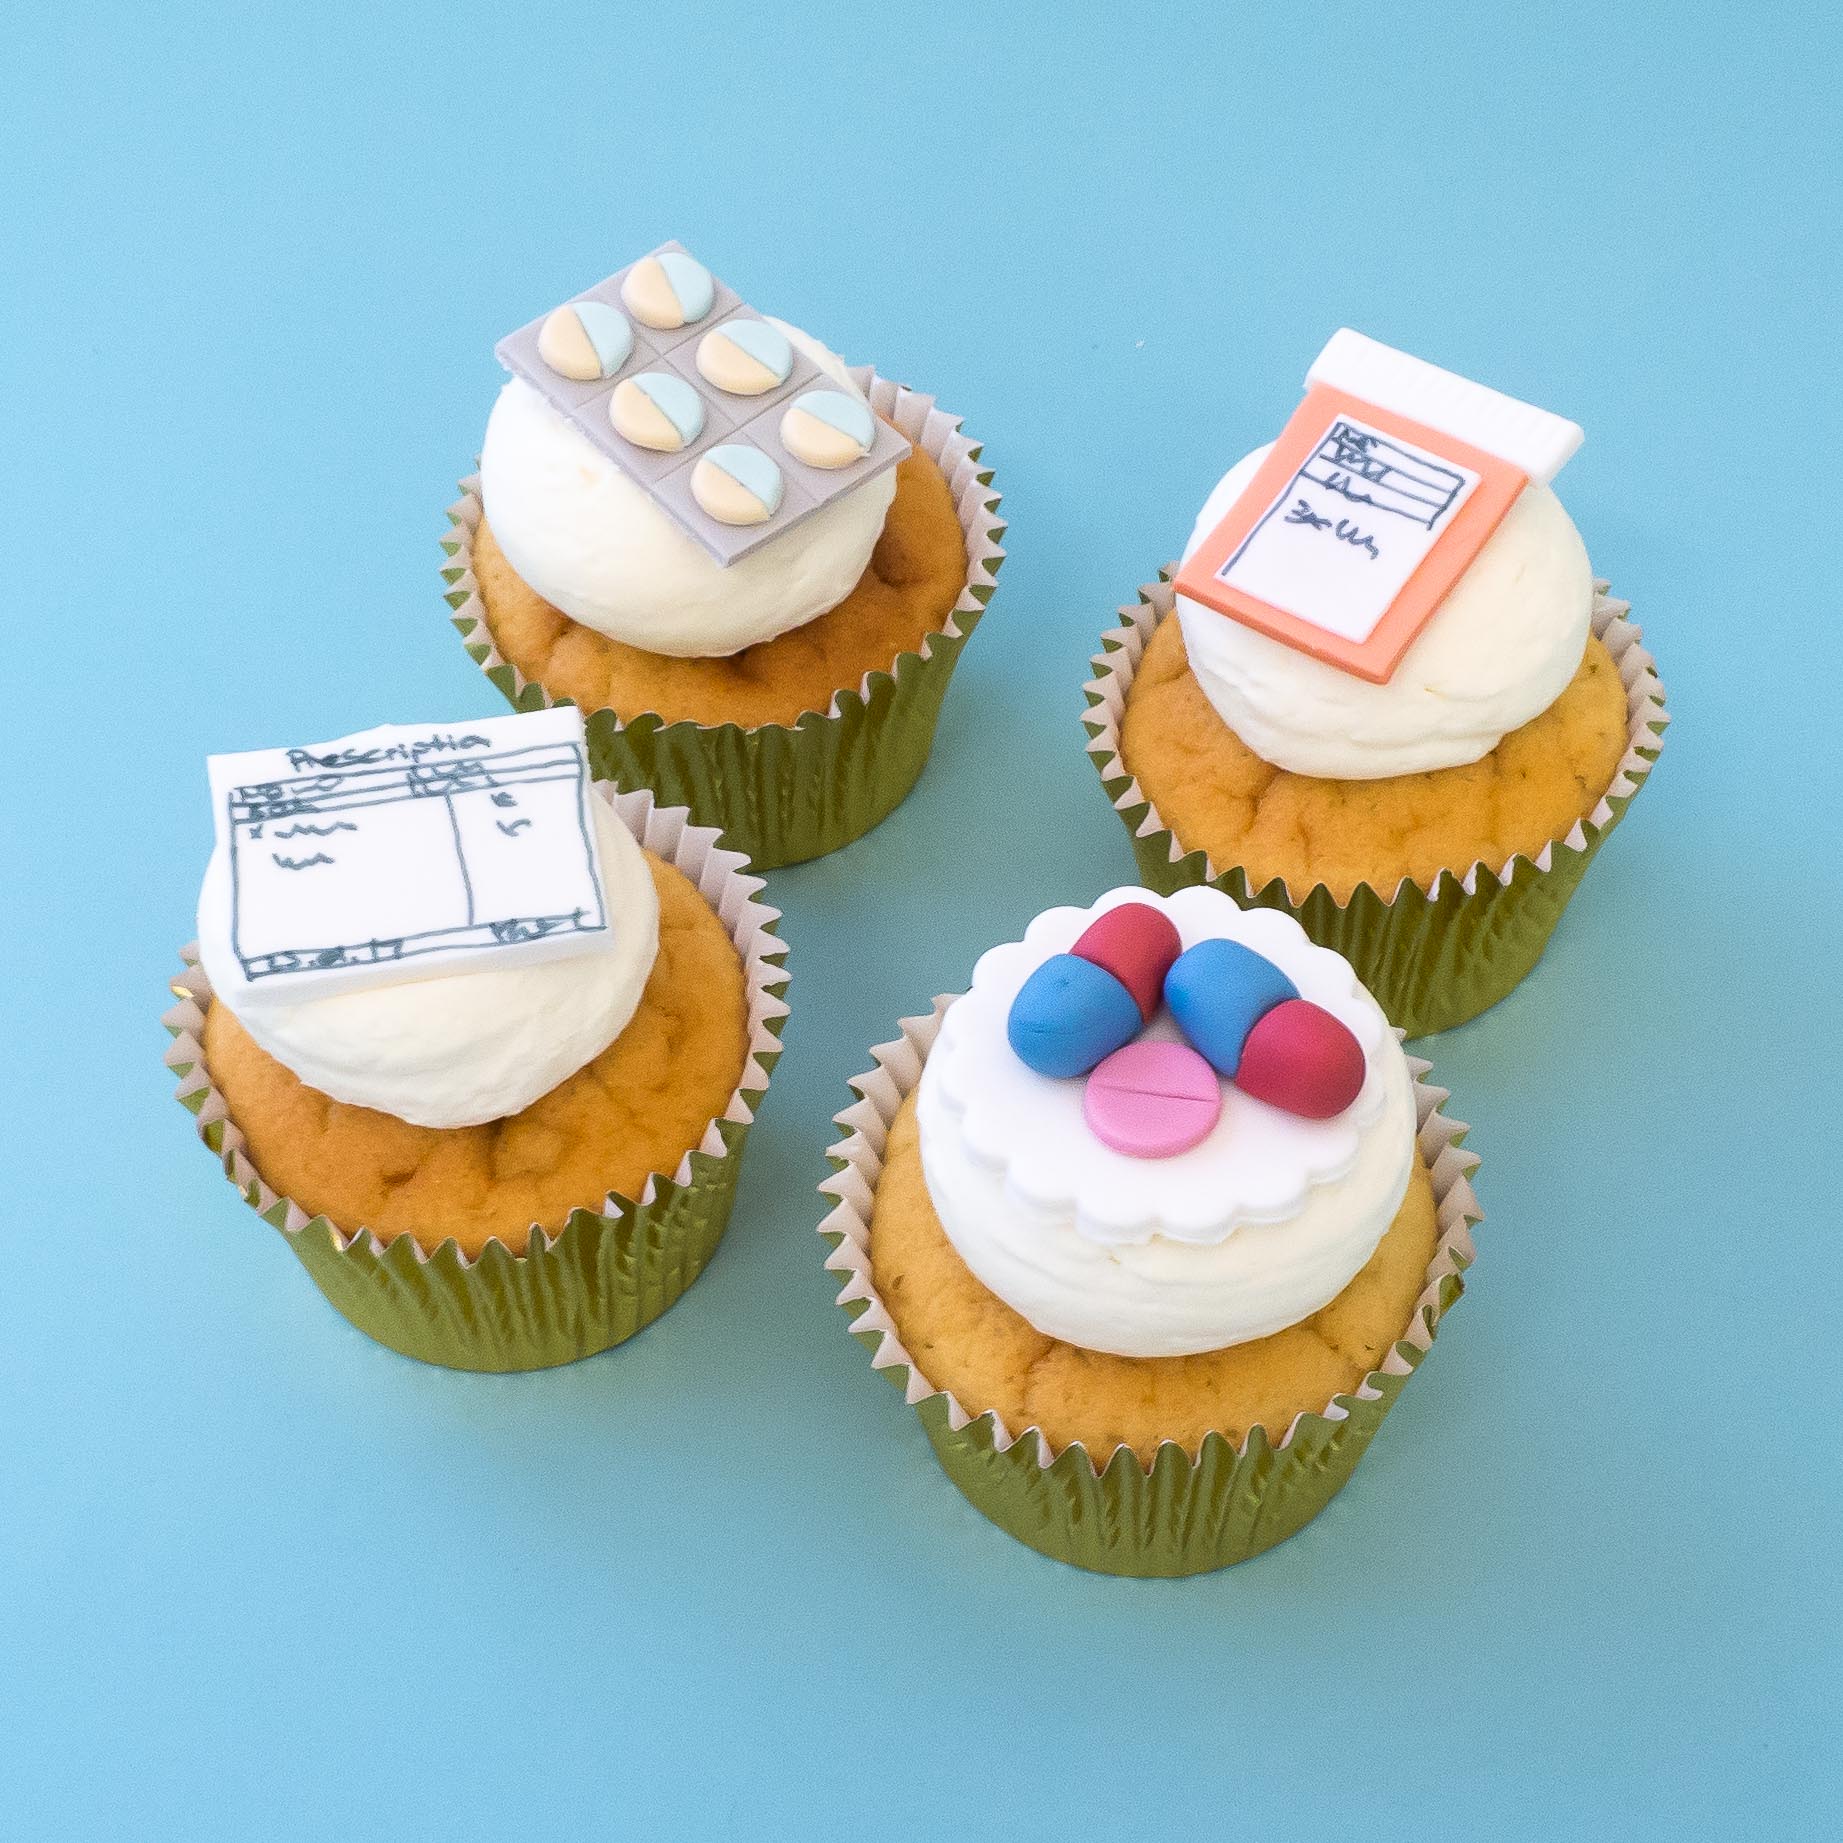 Corporate Medical Company Cupcakes by Rosalind Miller Cakes London